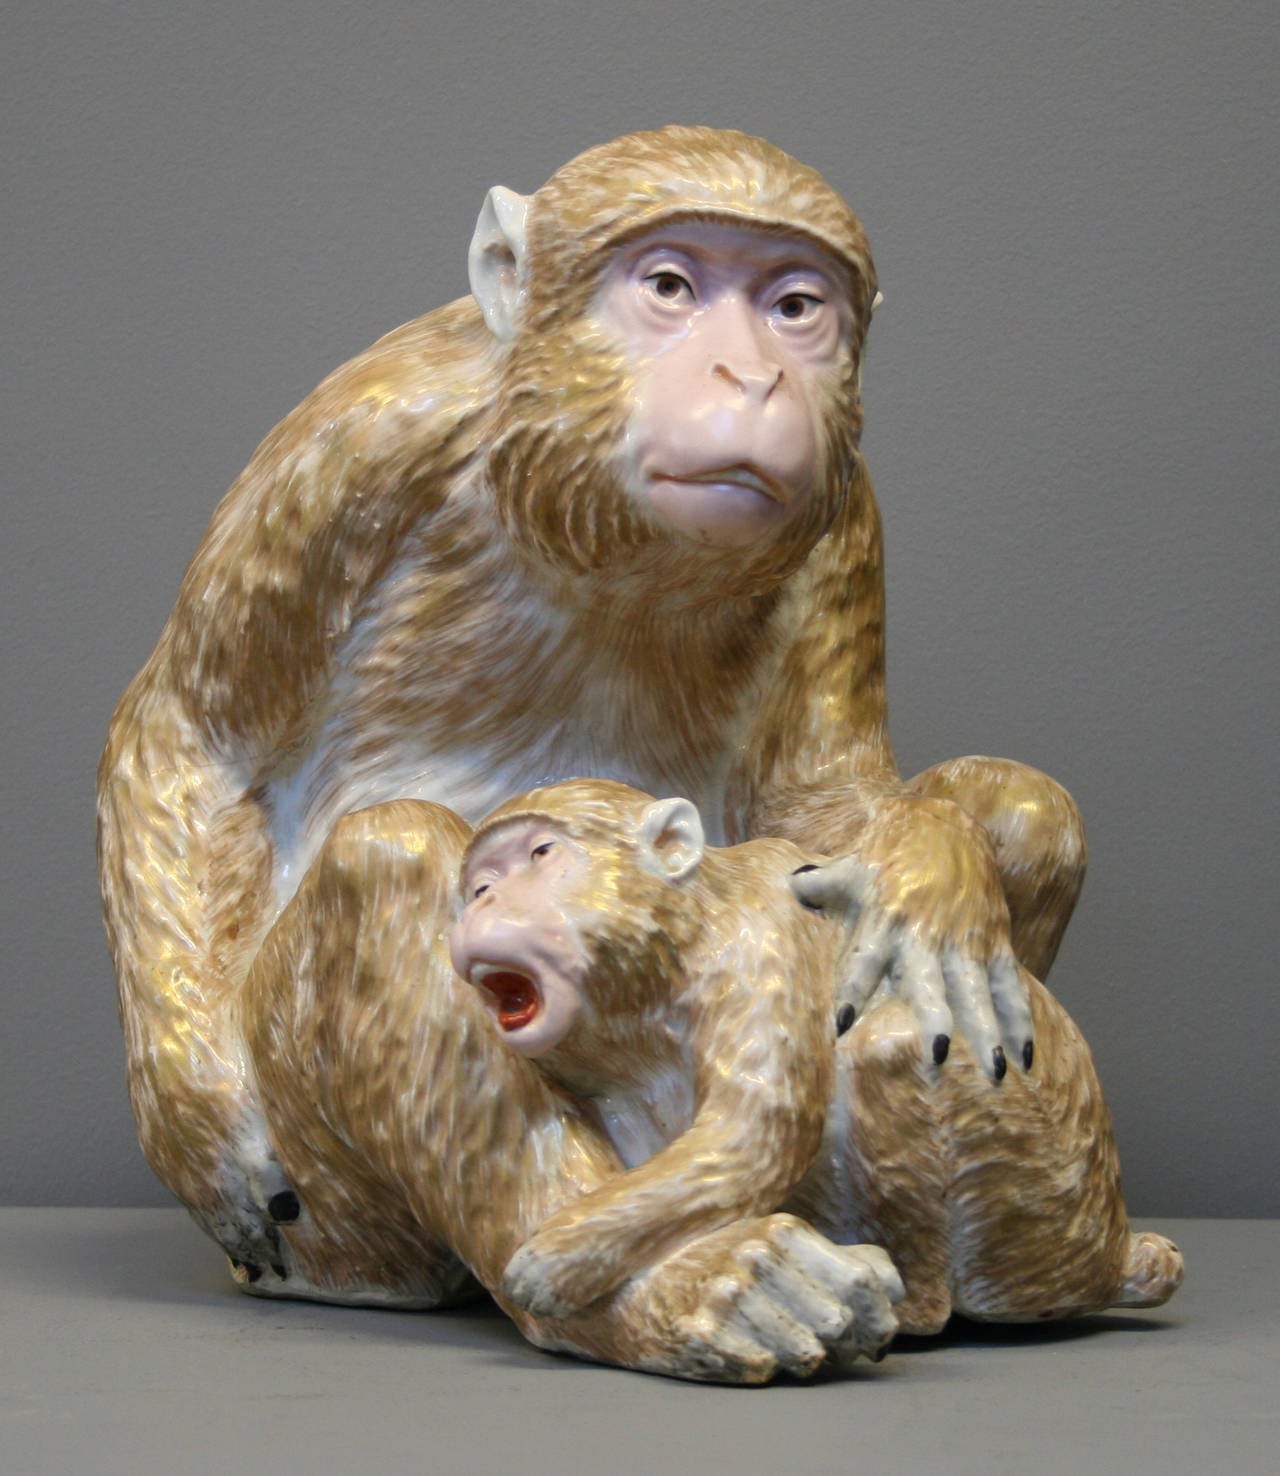 A large Japanese Kutani-ware figure of a golden monkey and infant

(Buyers in the UK or Europe will be subject to +VAT)